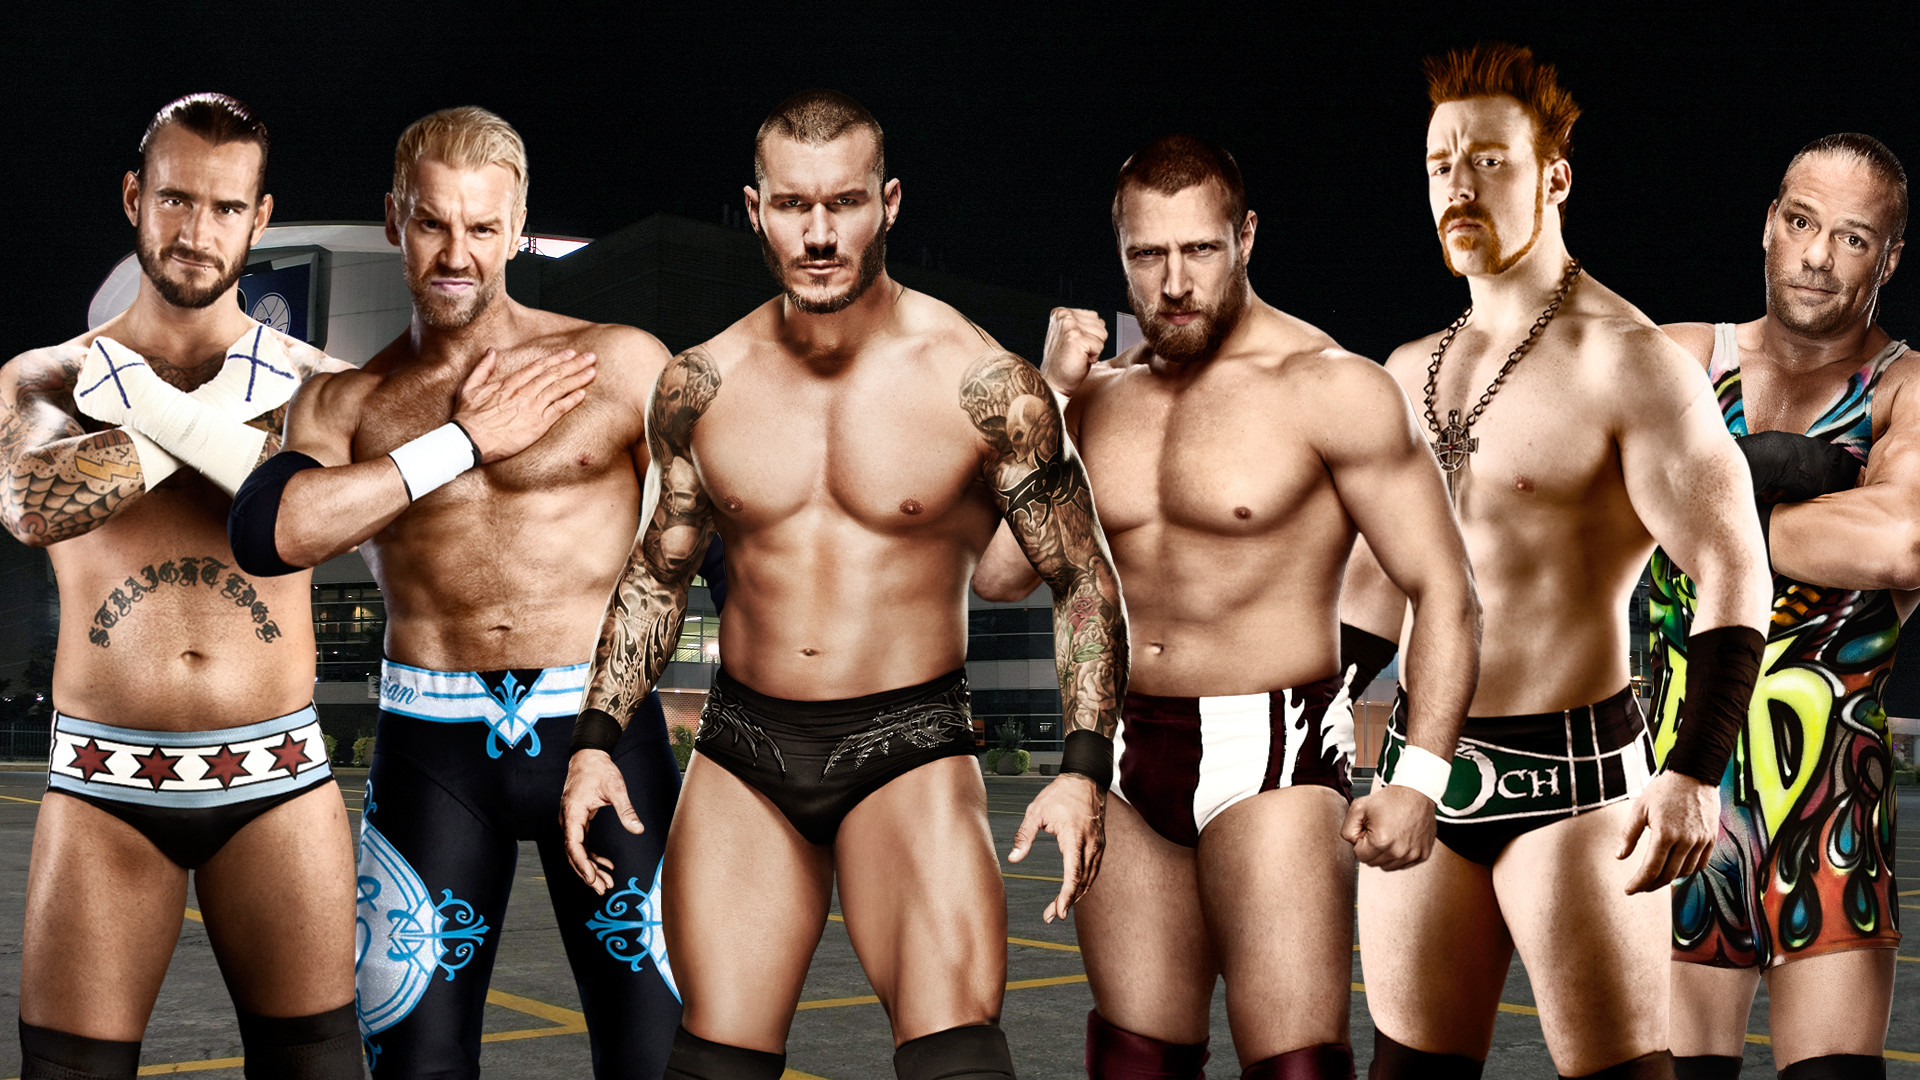 Movie WWE Money in the Bank 2013 HD Wallpaper | Background Image